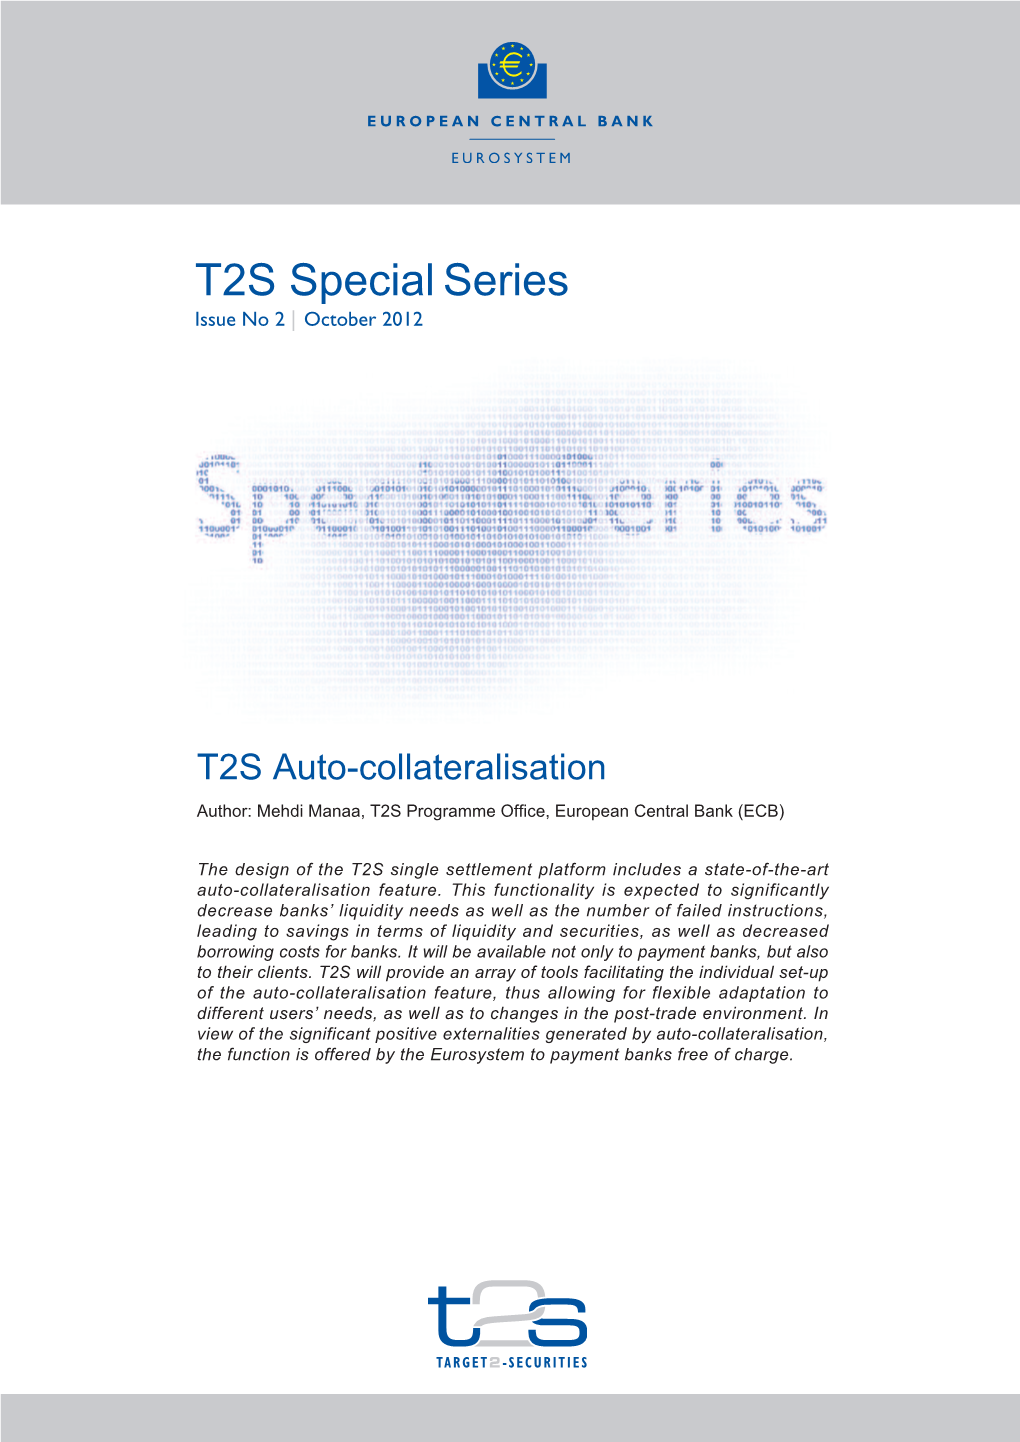 T2S Special Series: T2S Auto-Collateralisation